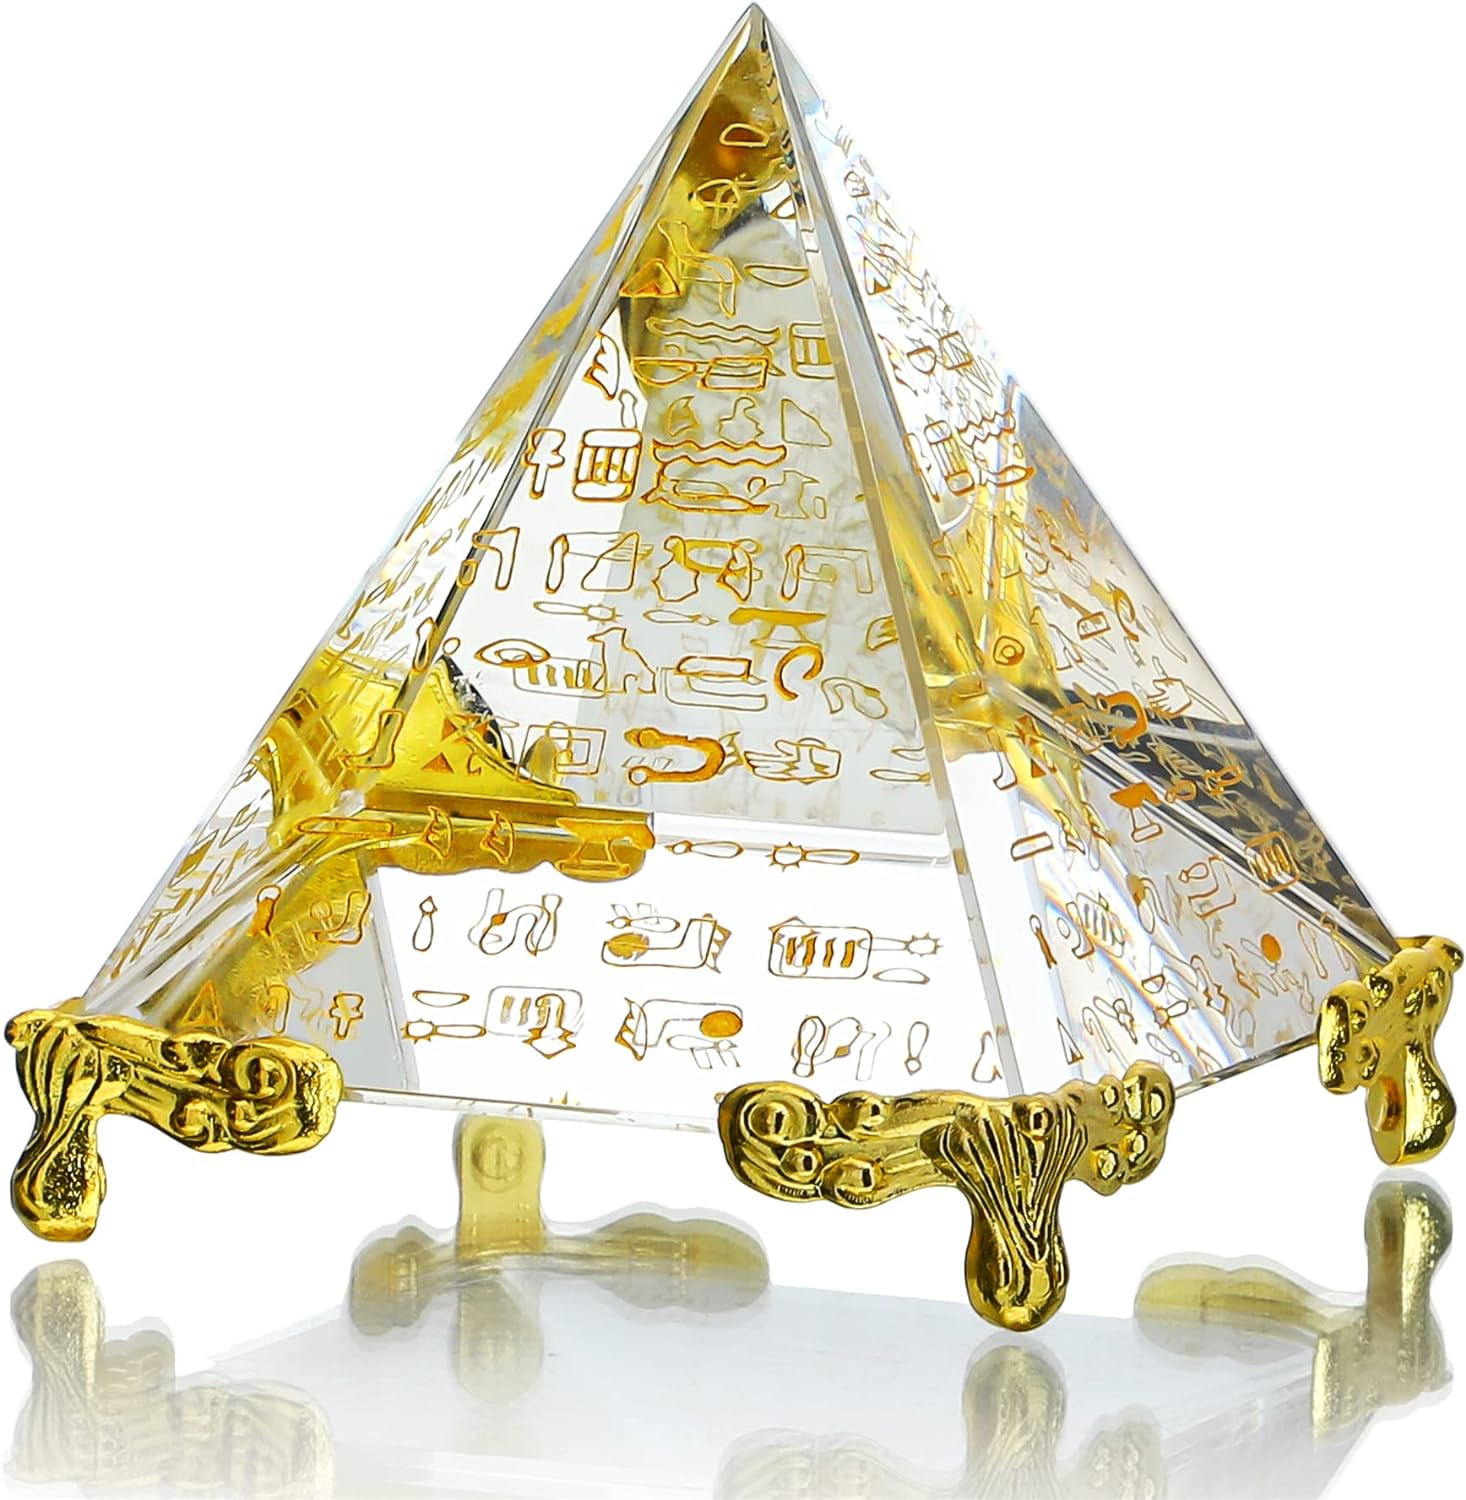 H&D HYALINE & DORA 60MM Crystal Pyramid Prism Paperweight Positive Energy Orname